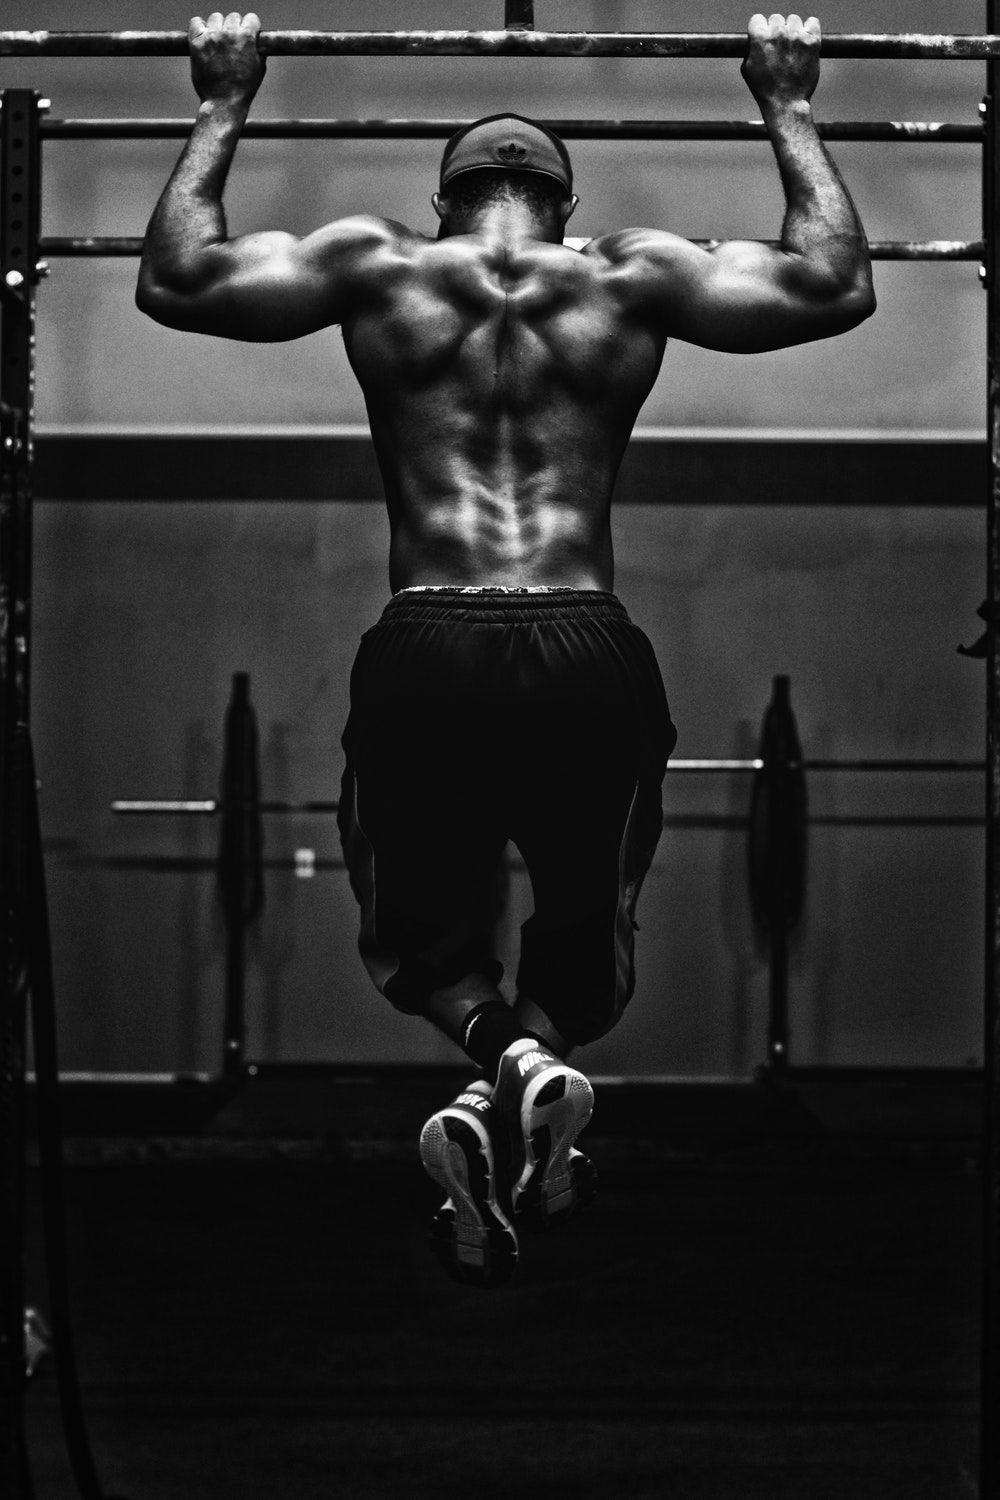 Gym Picture [HQ]. Download Free Image